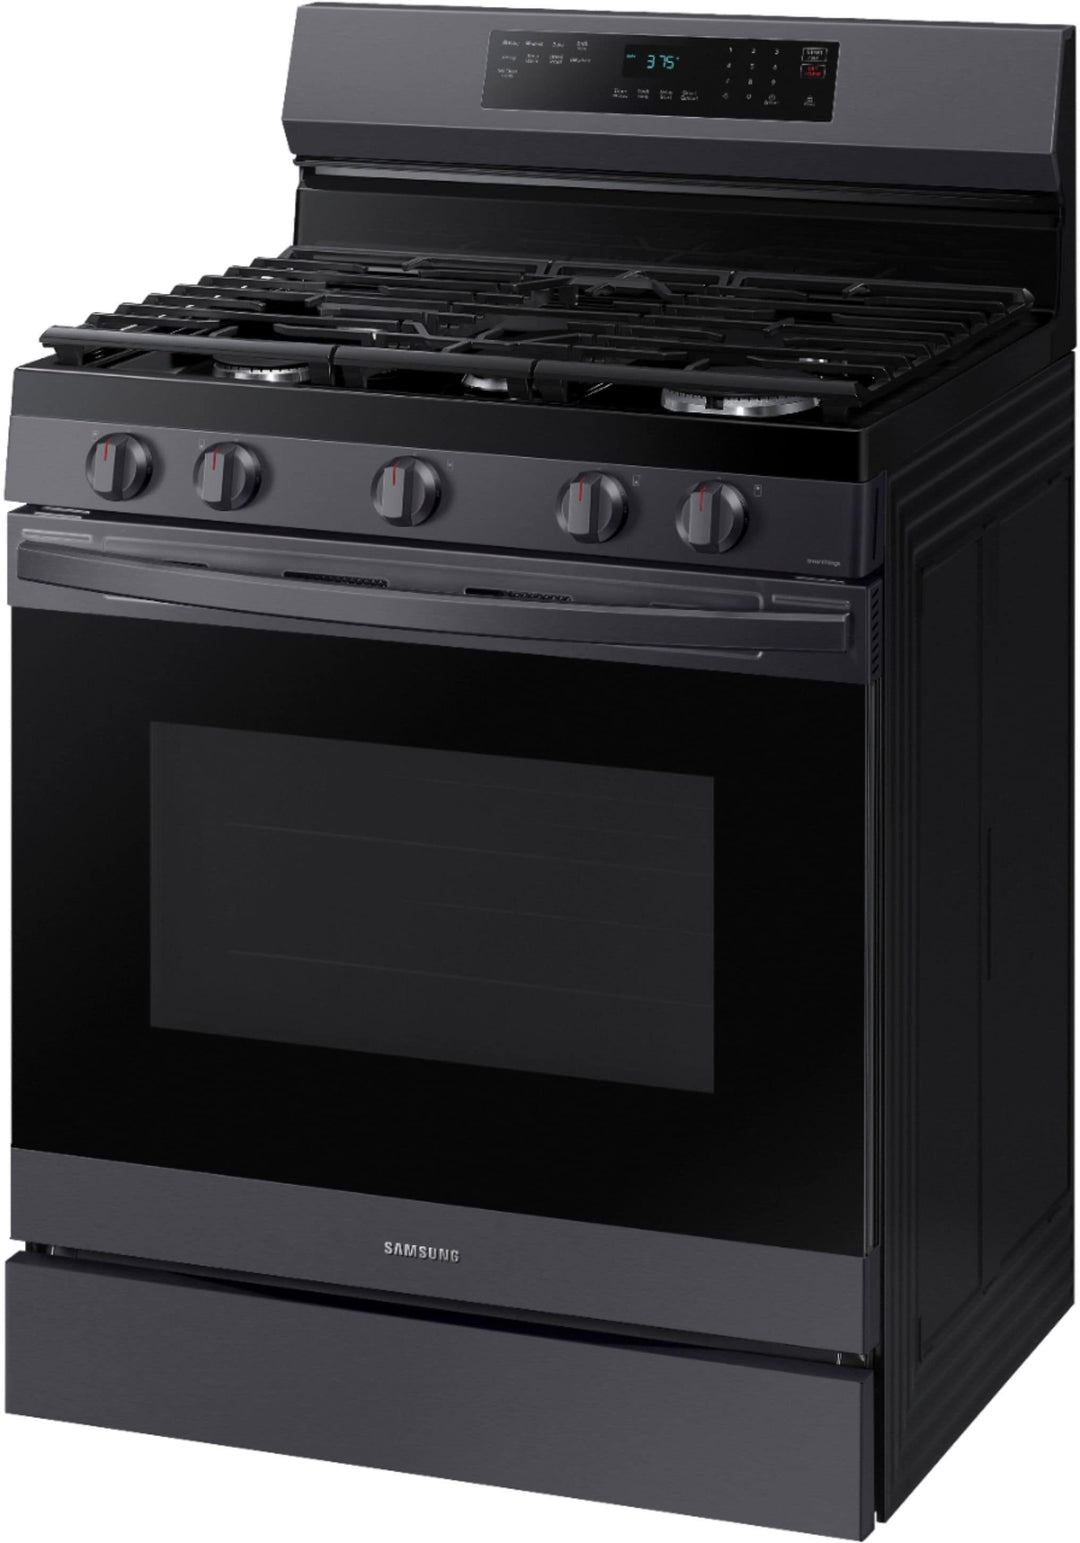 Samsung - 6.0 cu. ft. Freestanding Gas Range with WiFi, No-Preheat Air Fry & Convection - Black stainless steel_3